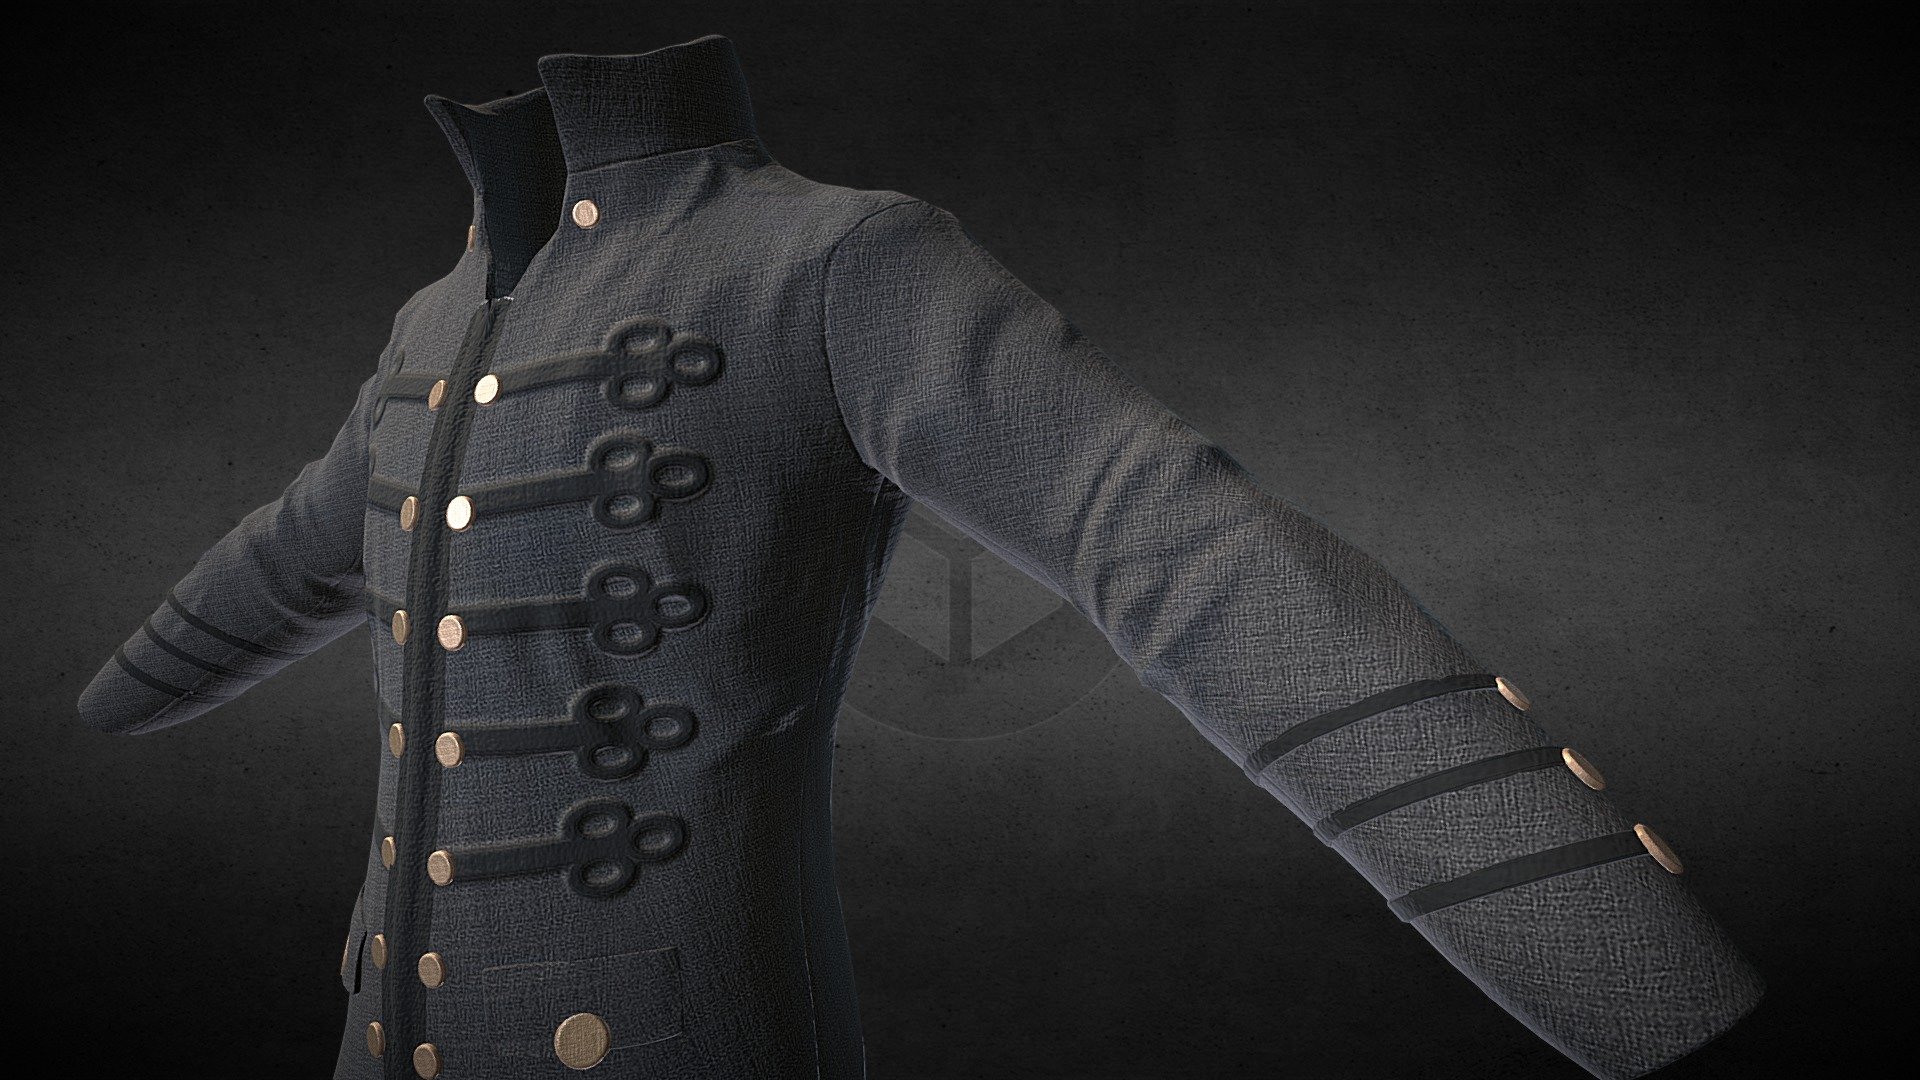 Military Tailcoat Clothing Concept Study 3d Model By Lmmichel